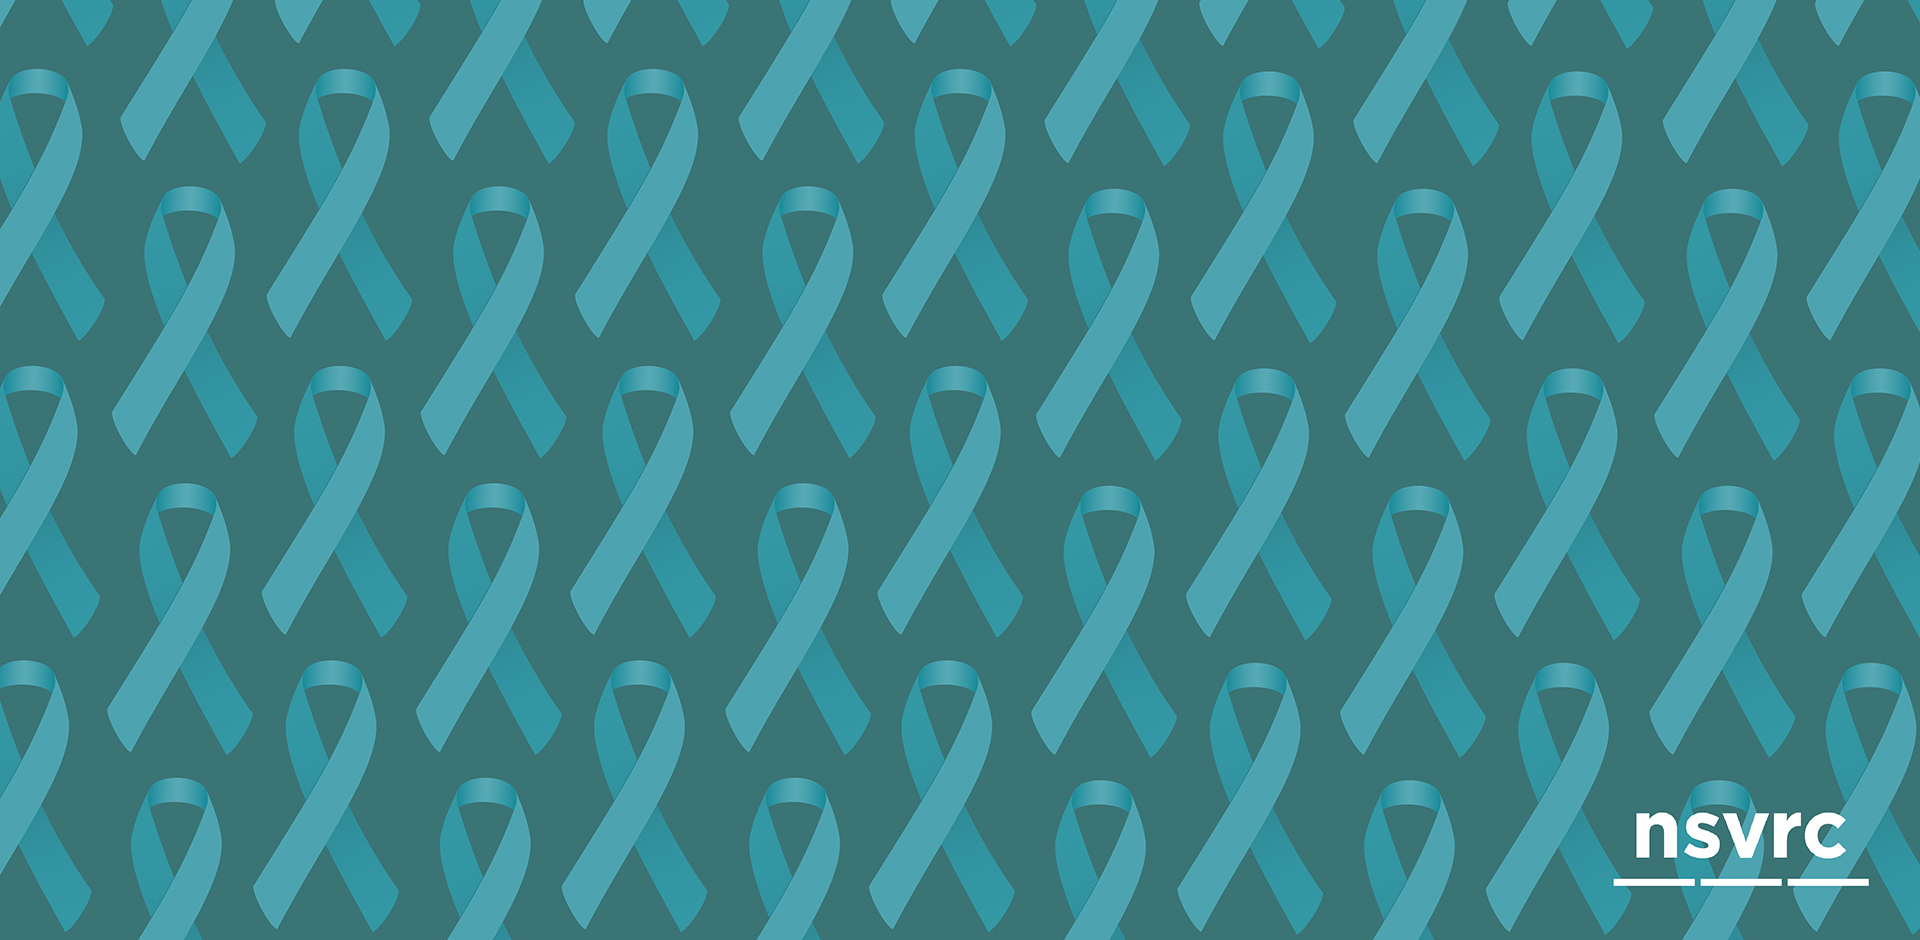 A grid of teal ribbons with the text “nsvrc.”